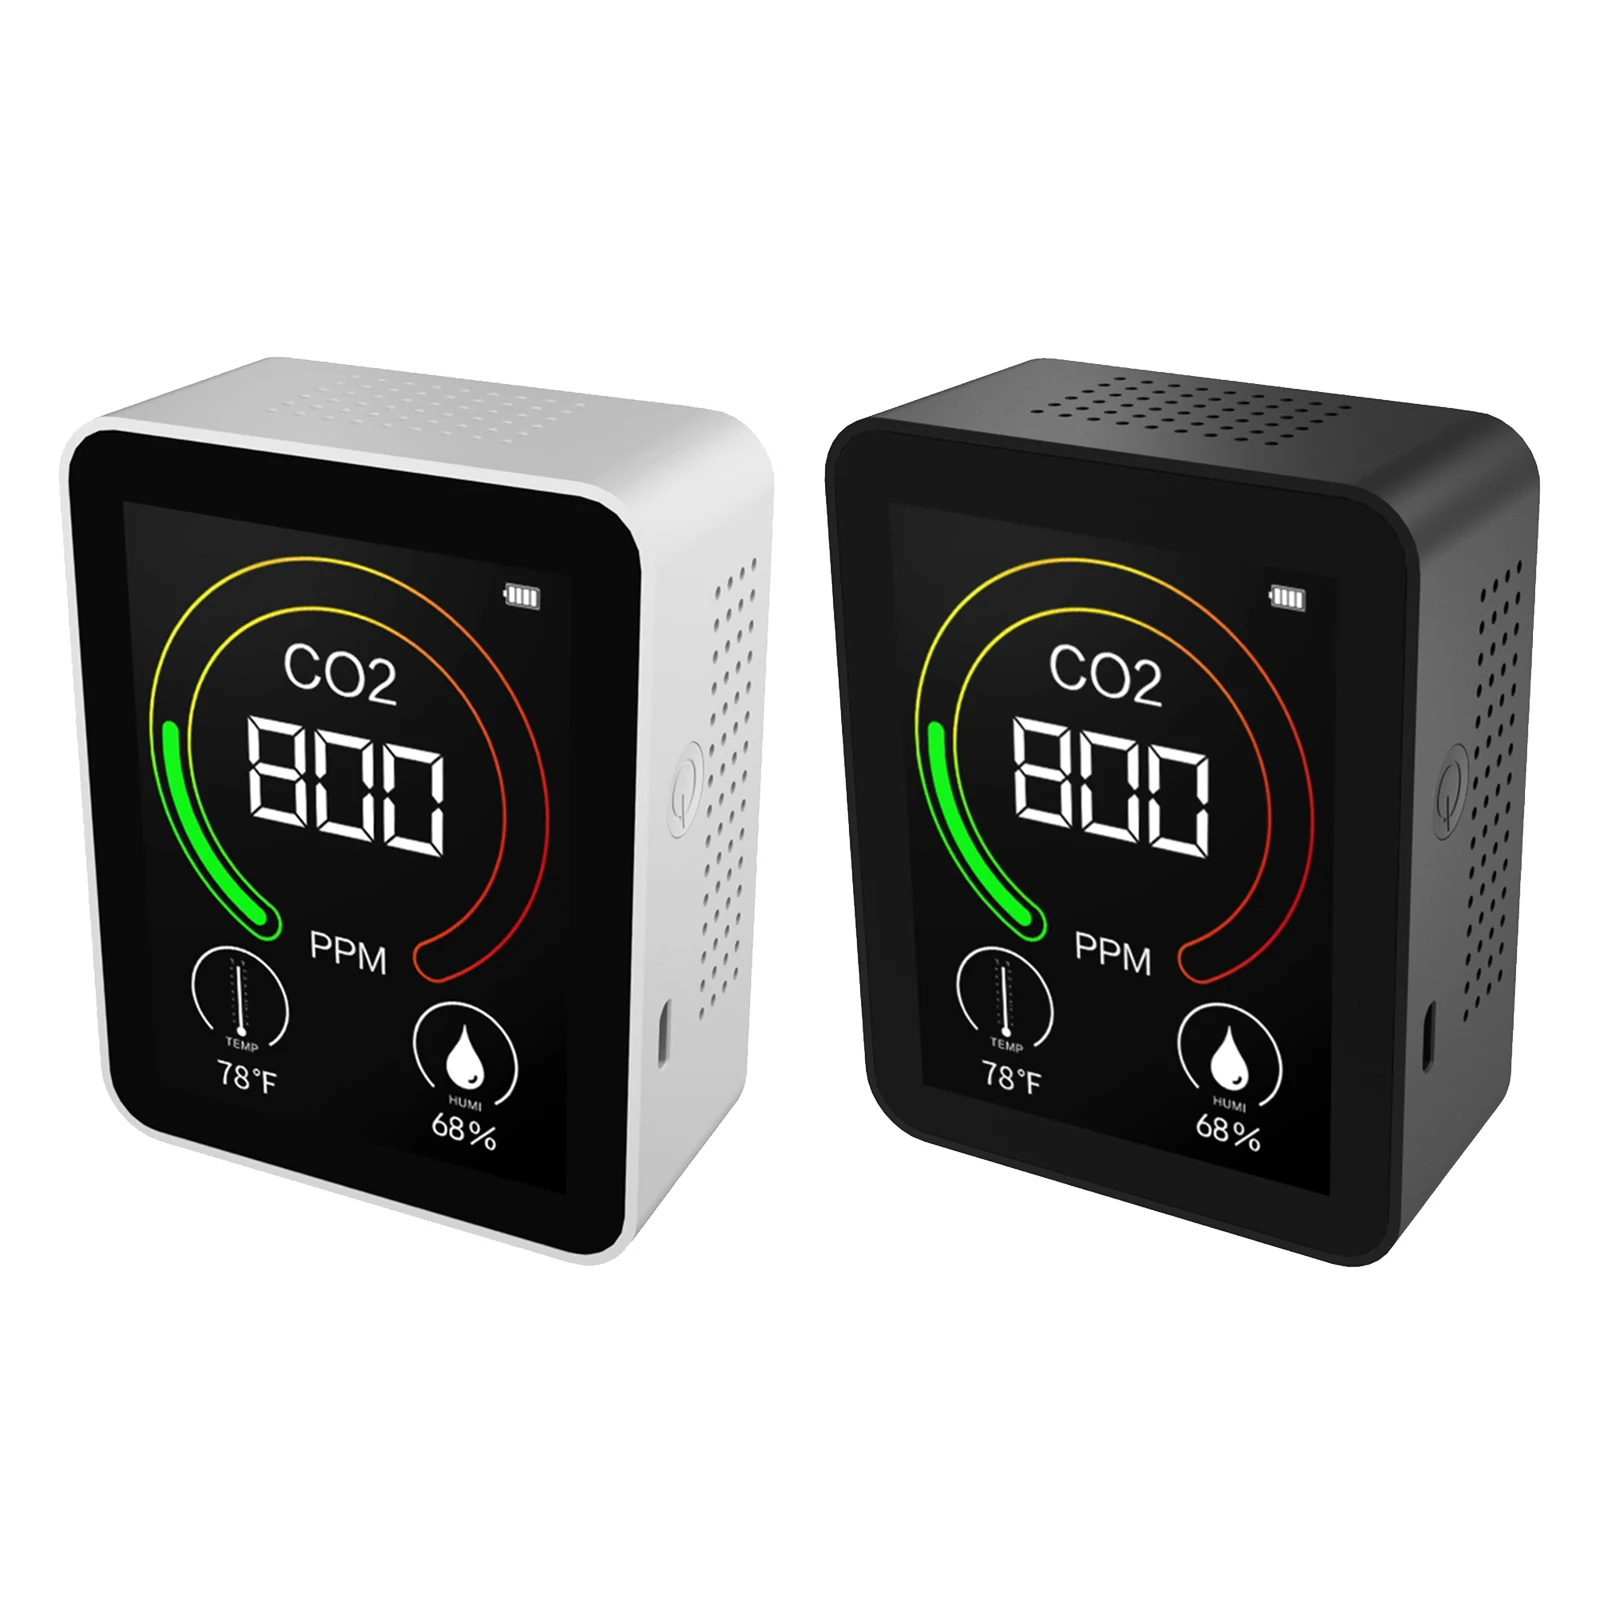 Indoor CO2 Measure for Home Offices Temperature and Humidity Real Time Display, Carbon Dioxide Detector